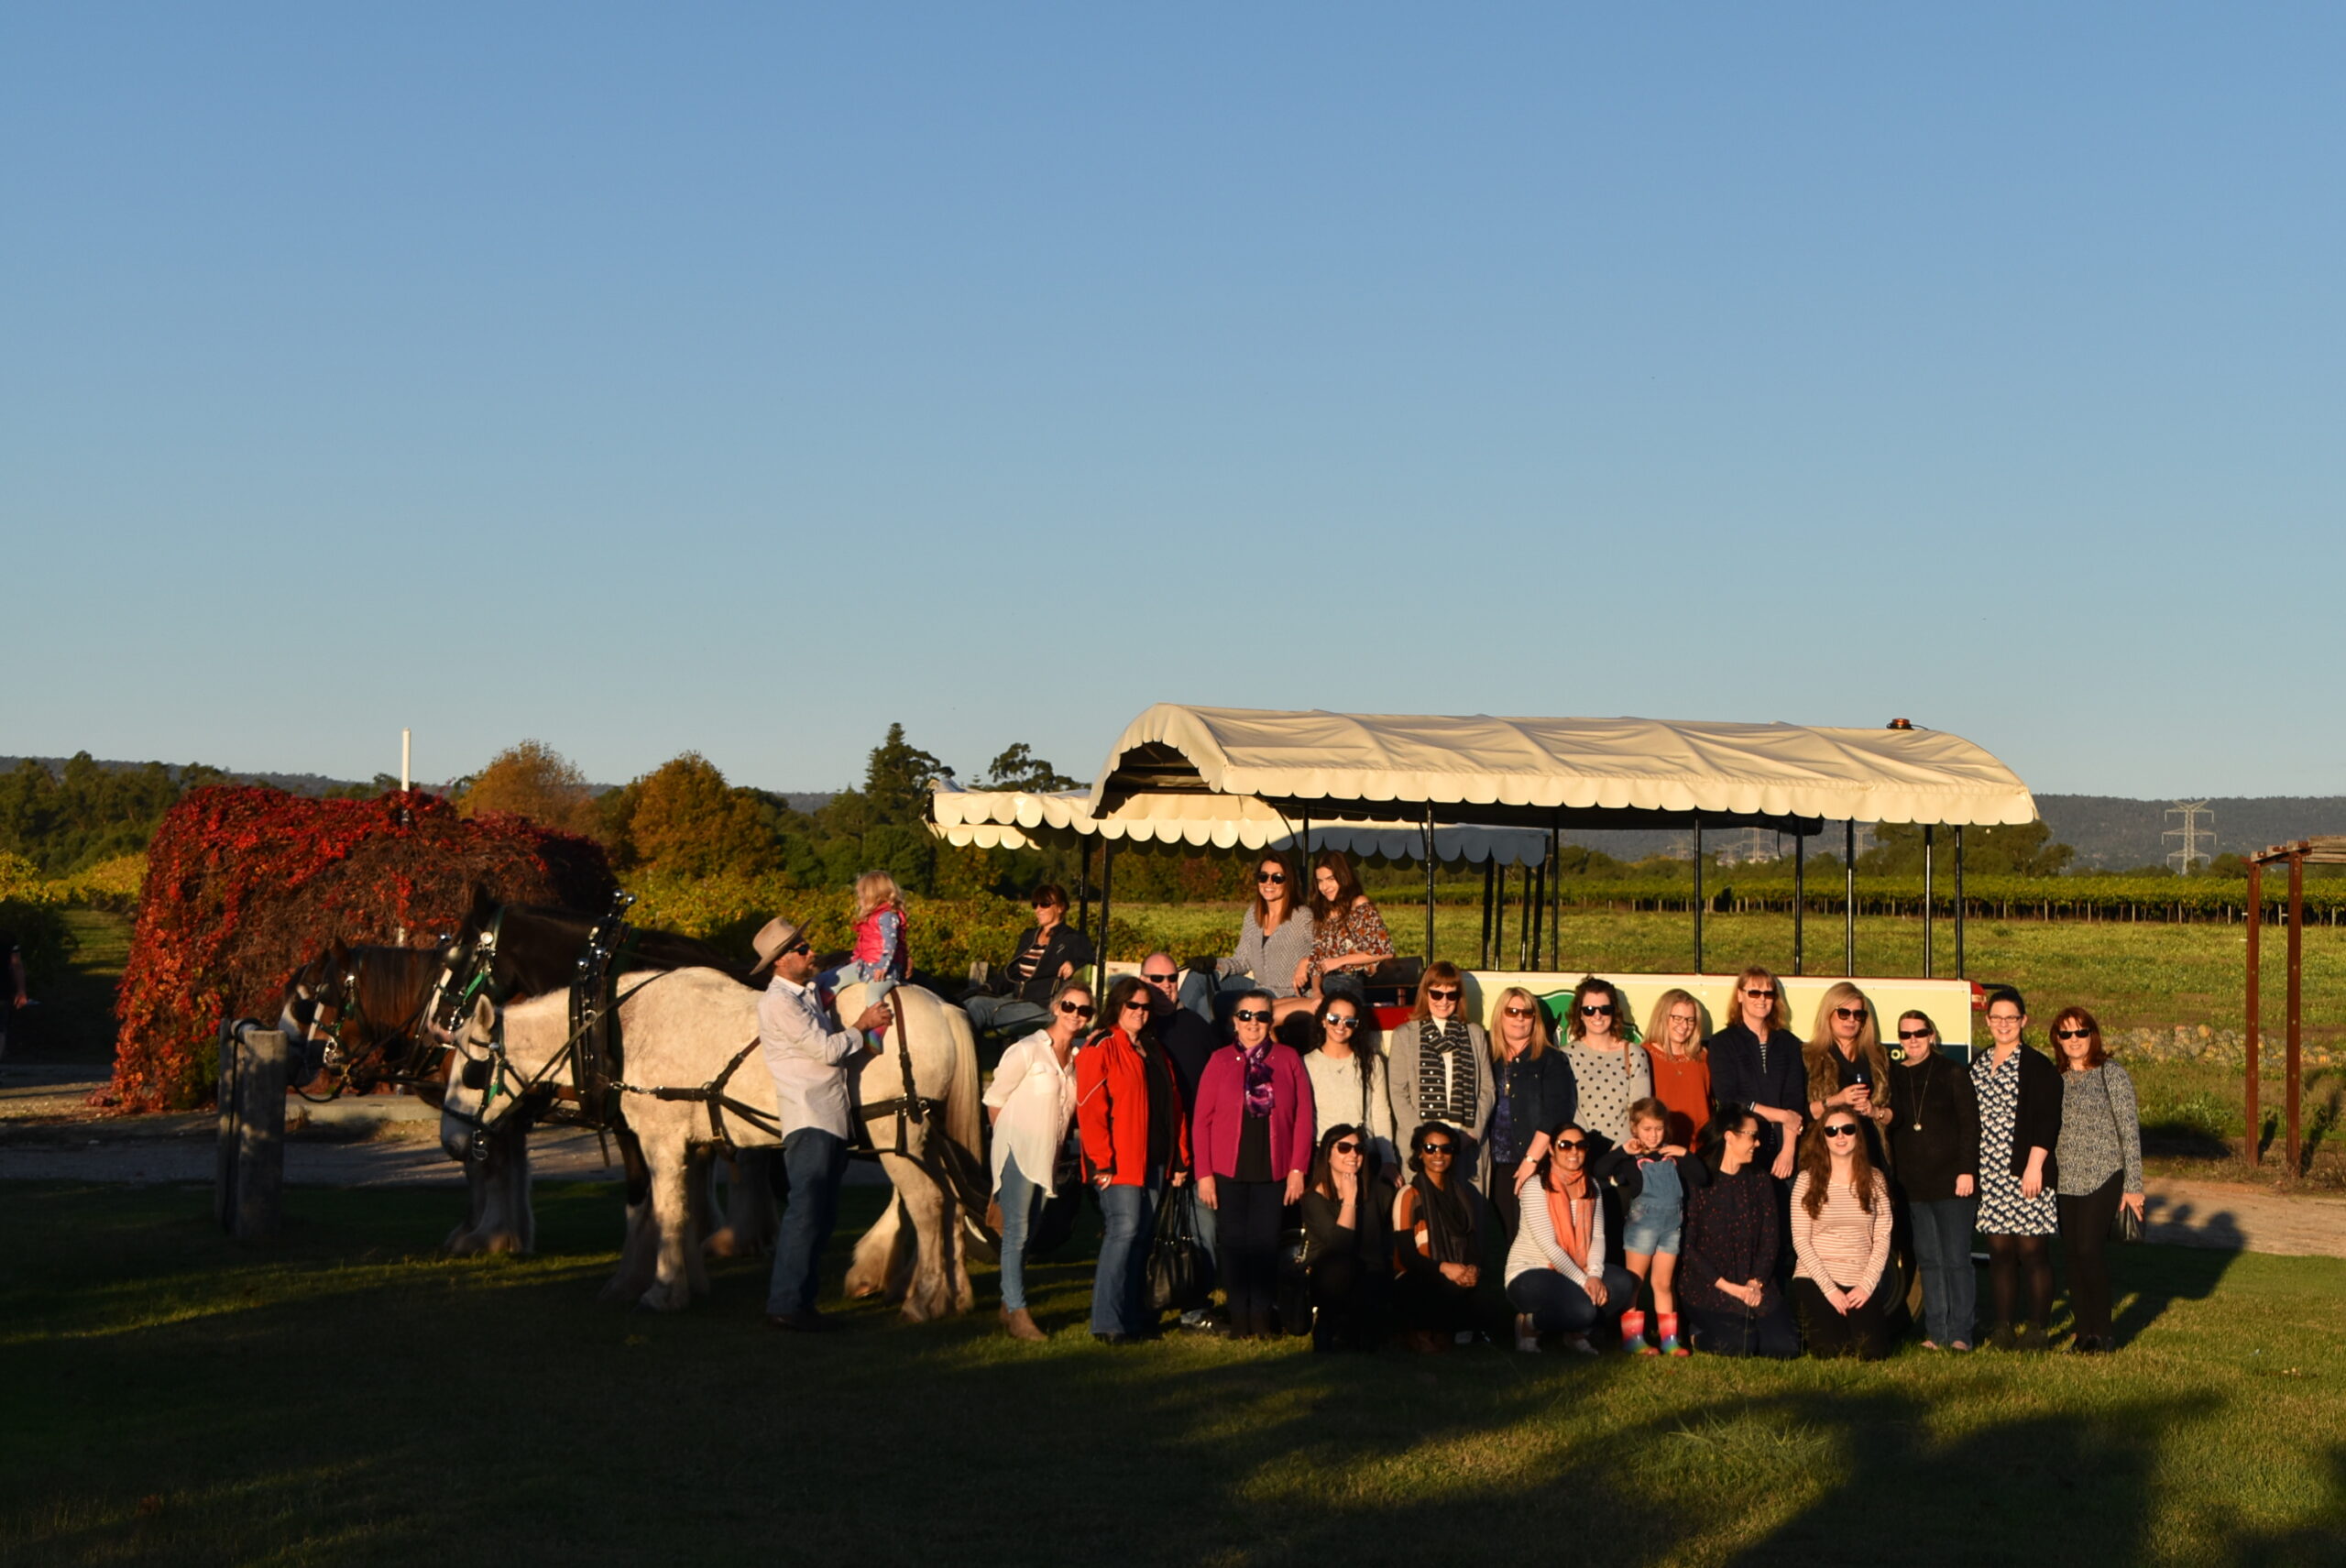 Group Booking - Wagon Deluxe - Horse Drawn Wagon Tour